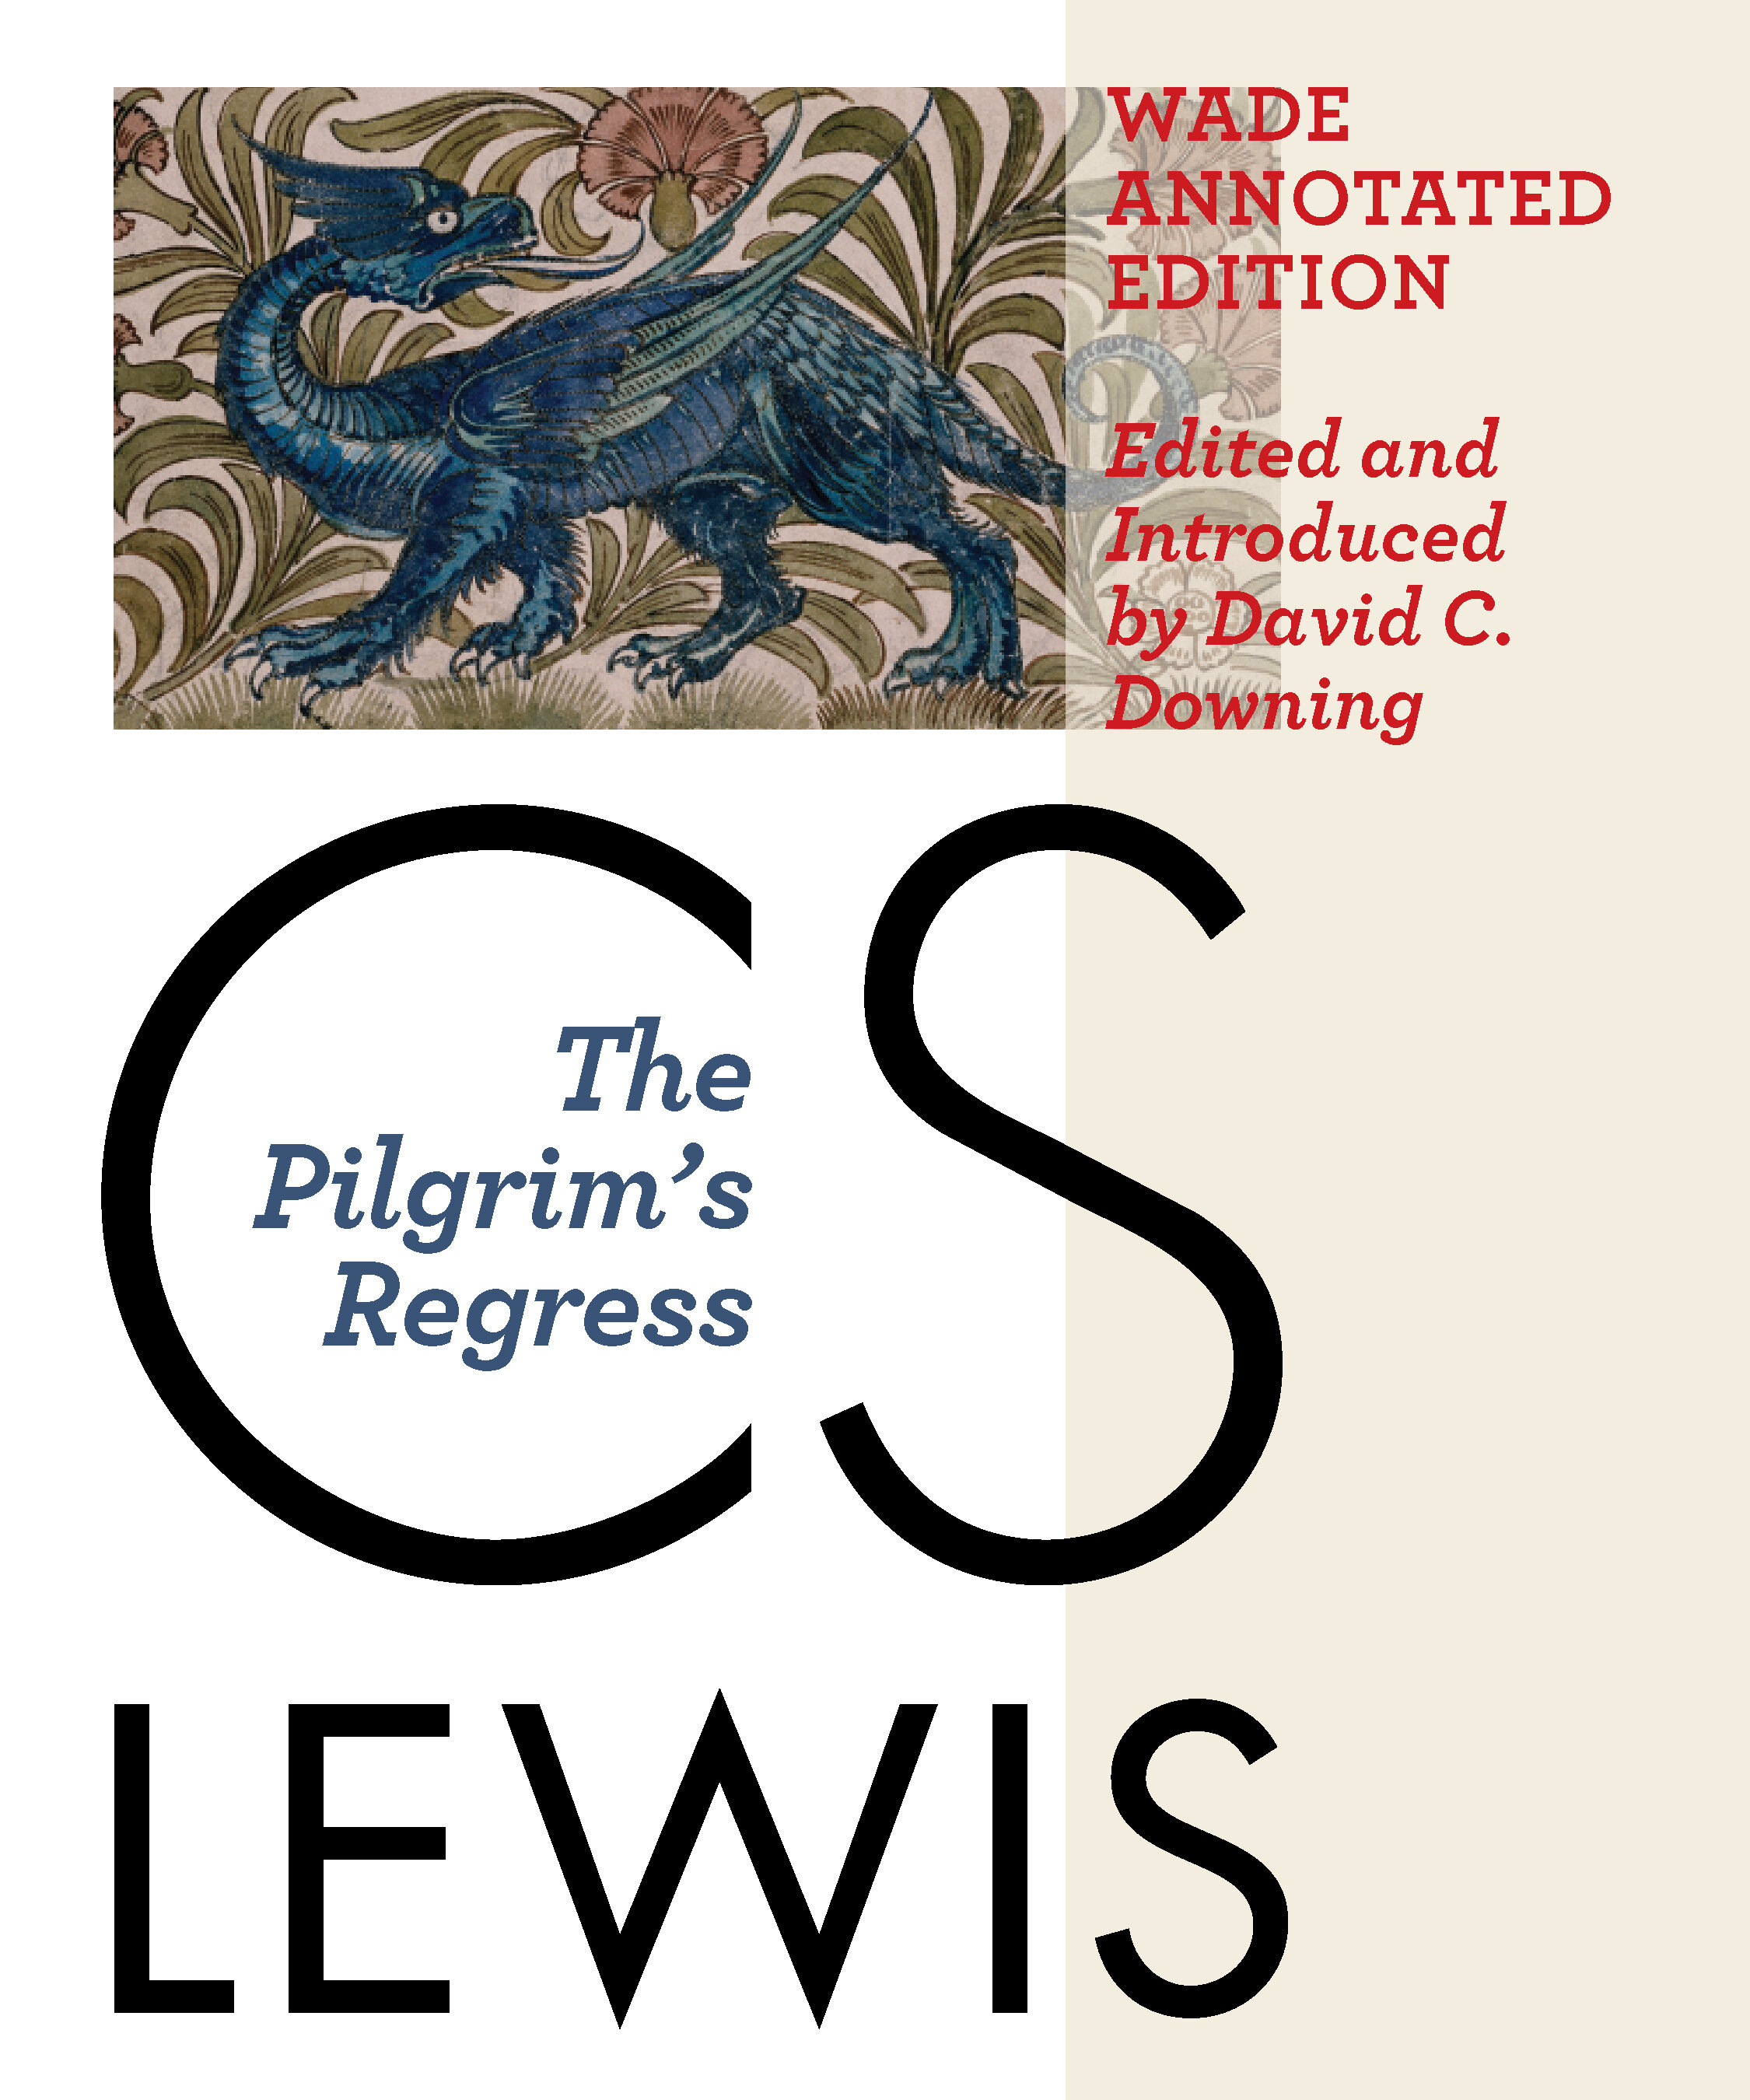 The Pilgrim’s Regress, Wade Annotated Edition